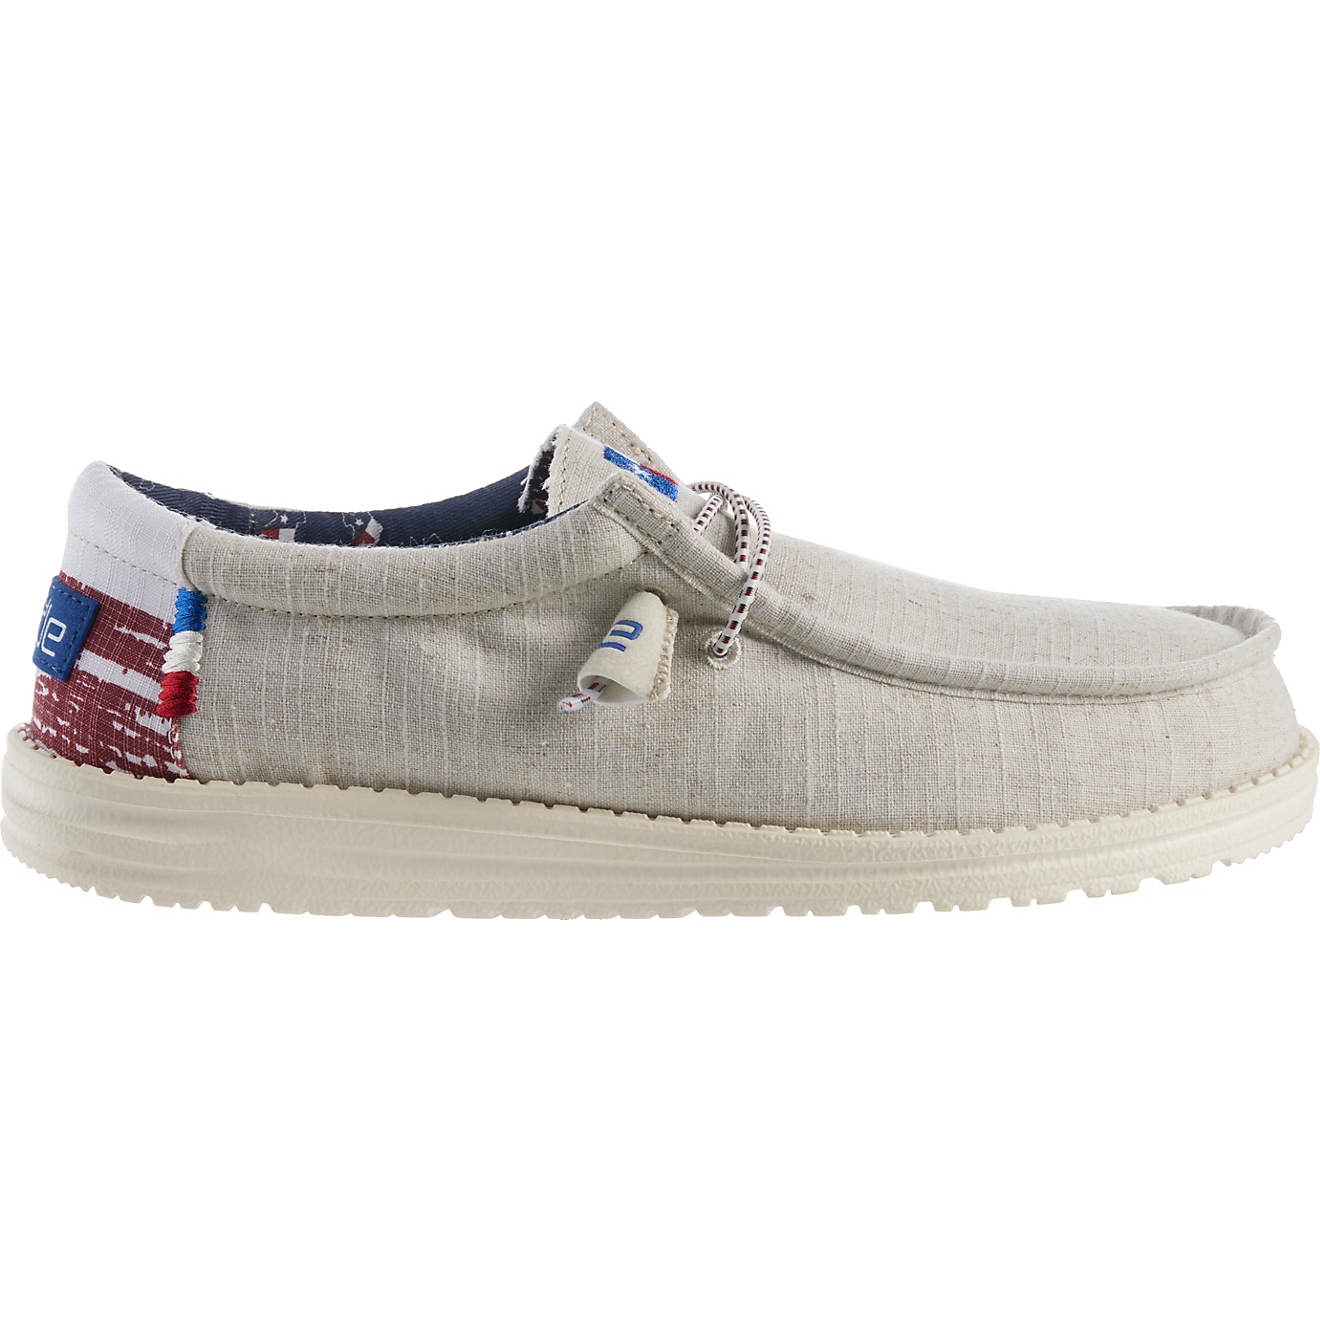 Wally Texas Canvas in Off White by Hey Dude Shoes